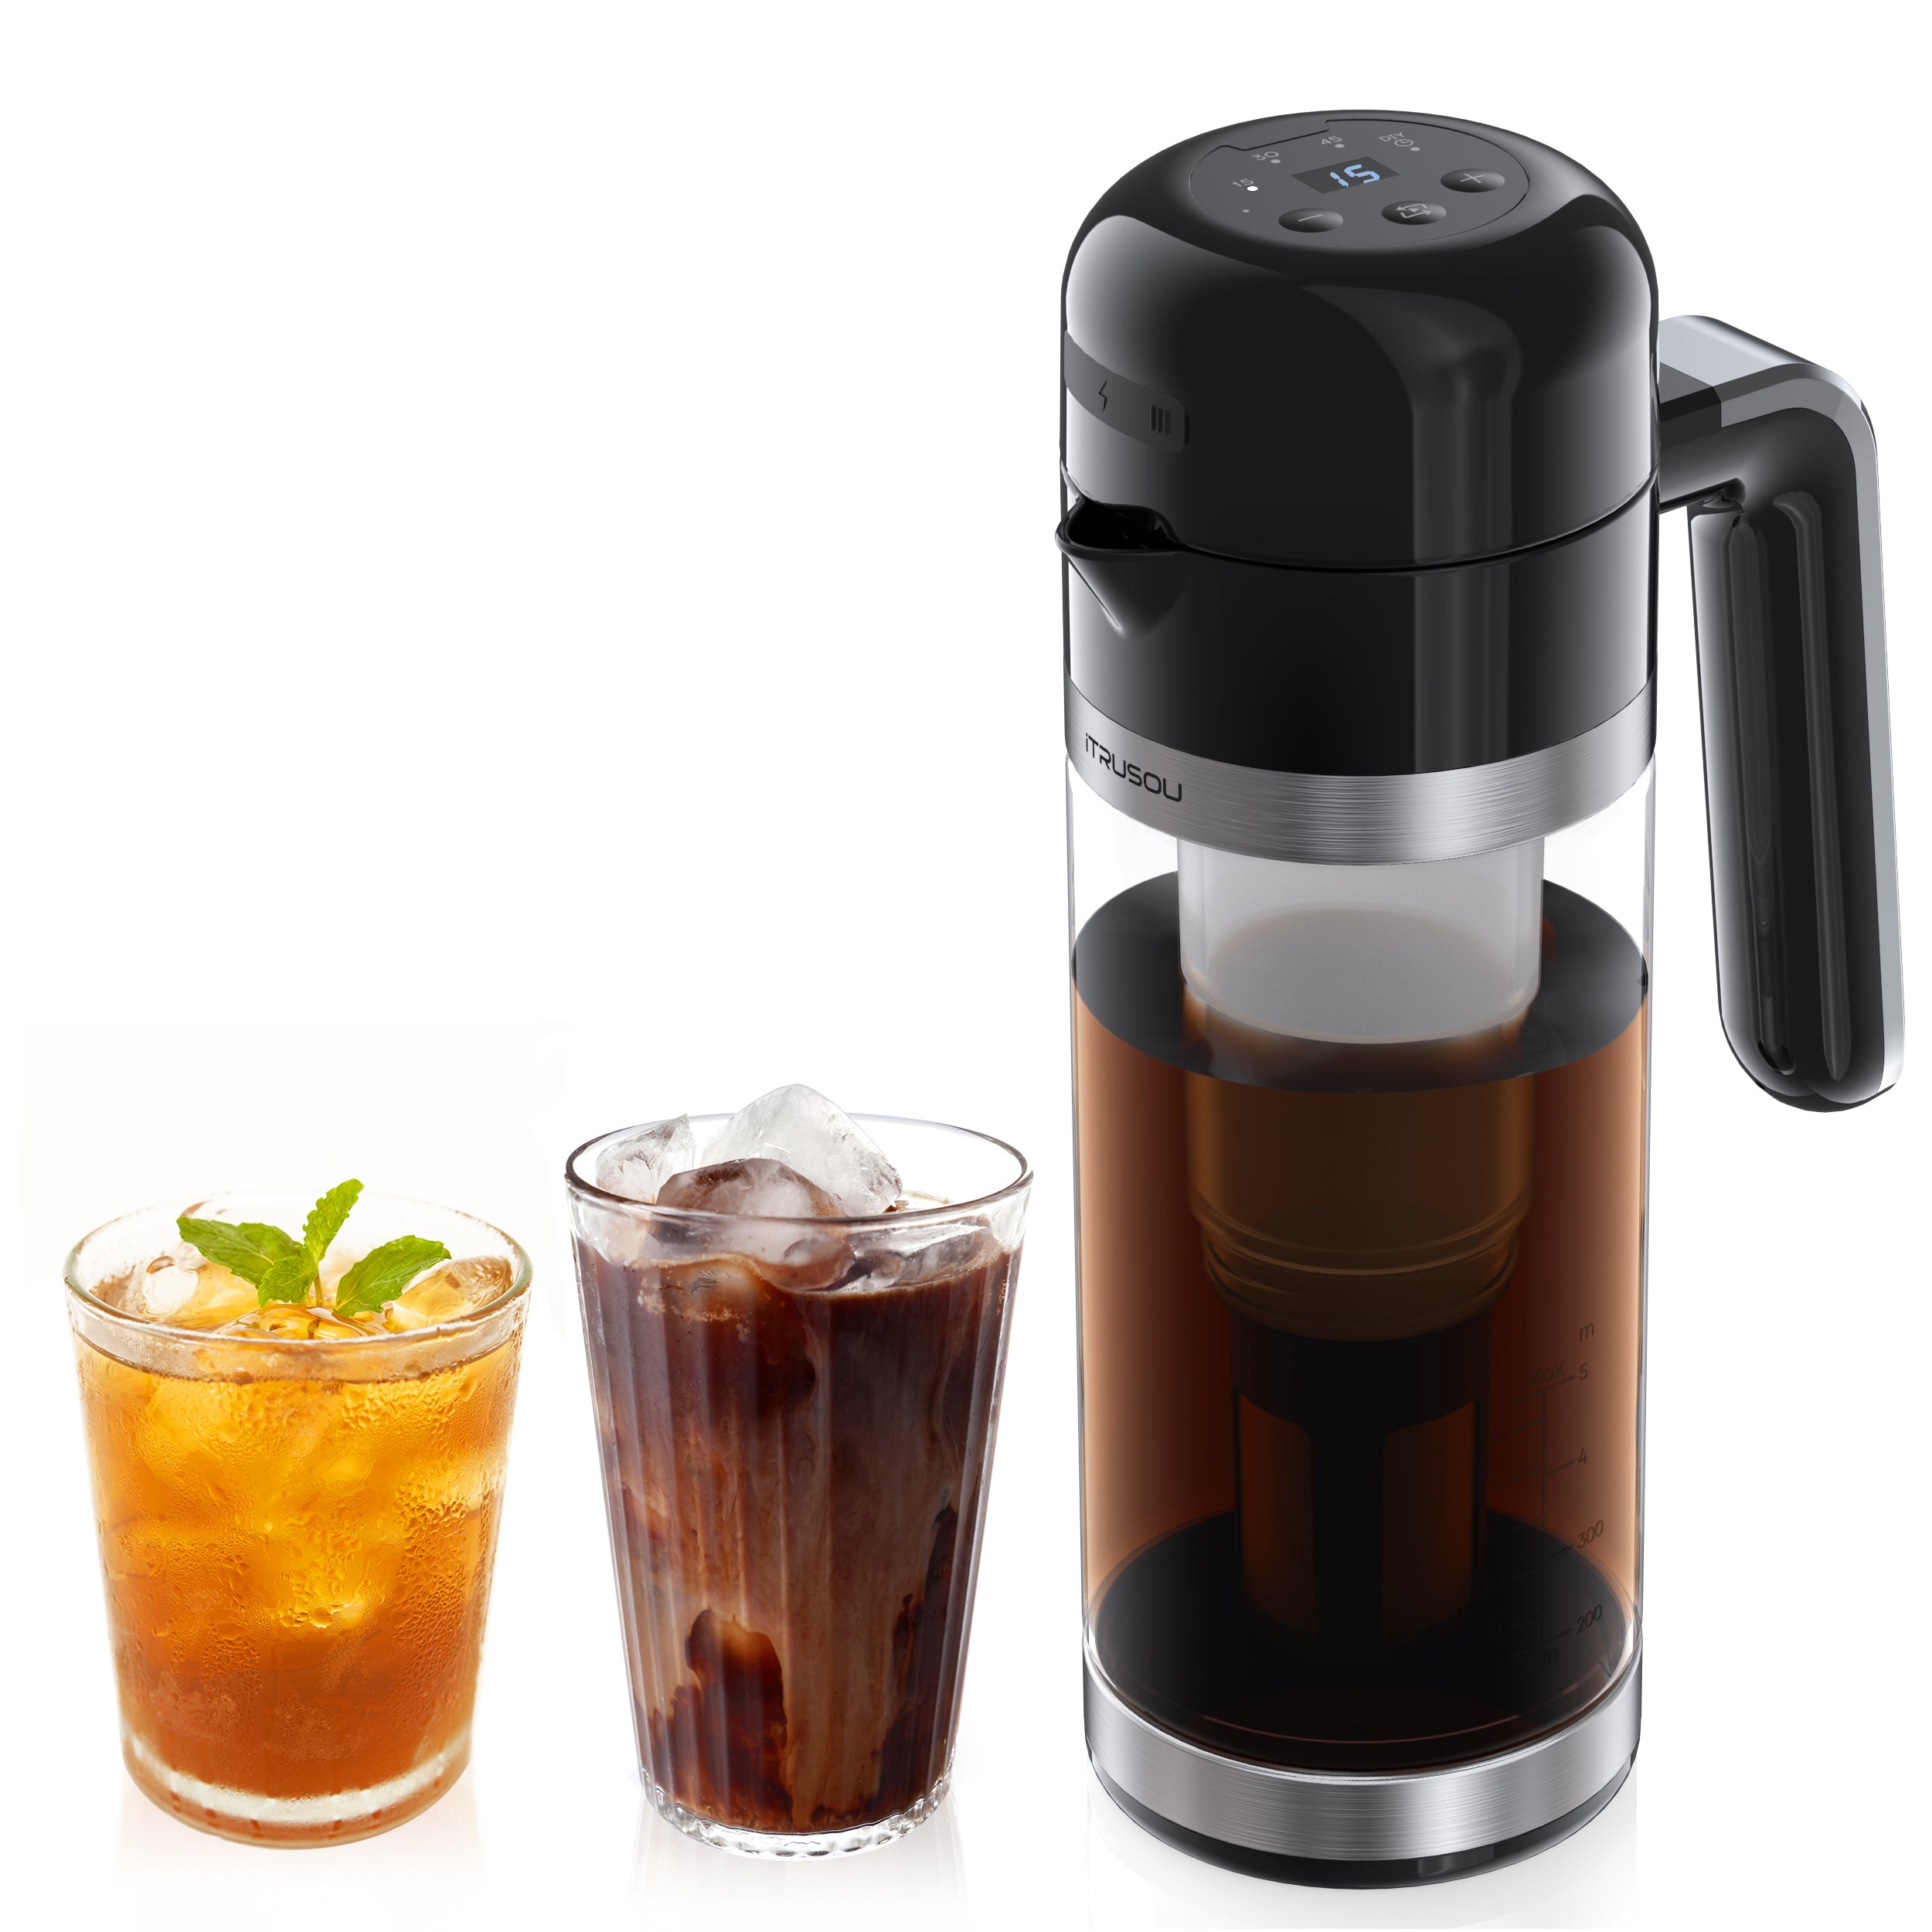 Toddy® Cold Brew System - Non-electric Coffee Maker - Smooth & Rich - Super  Easy 656103006939